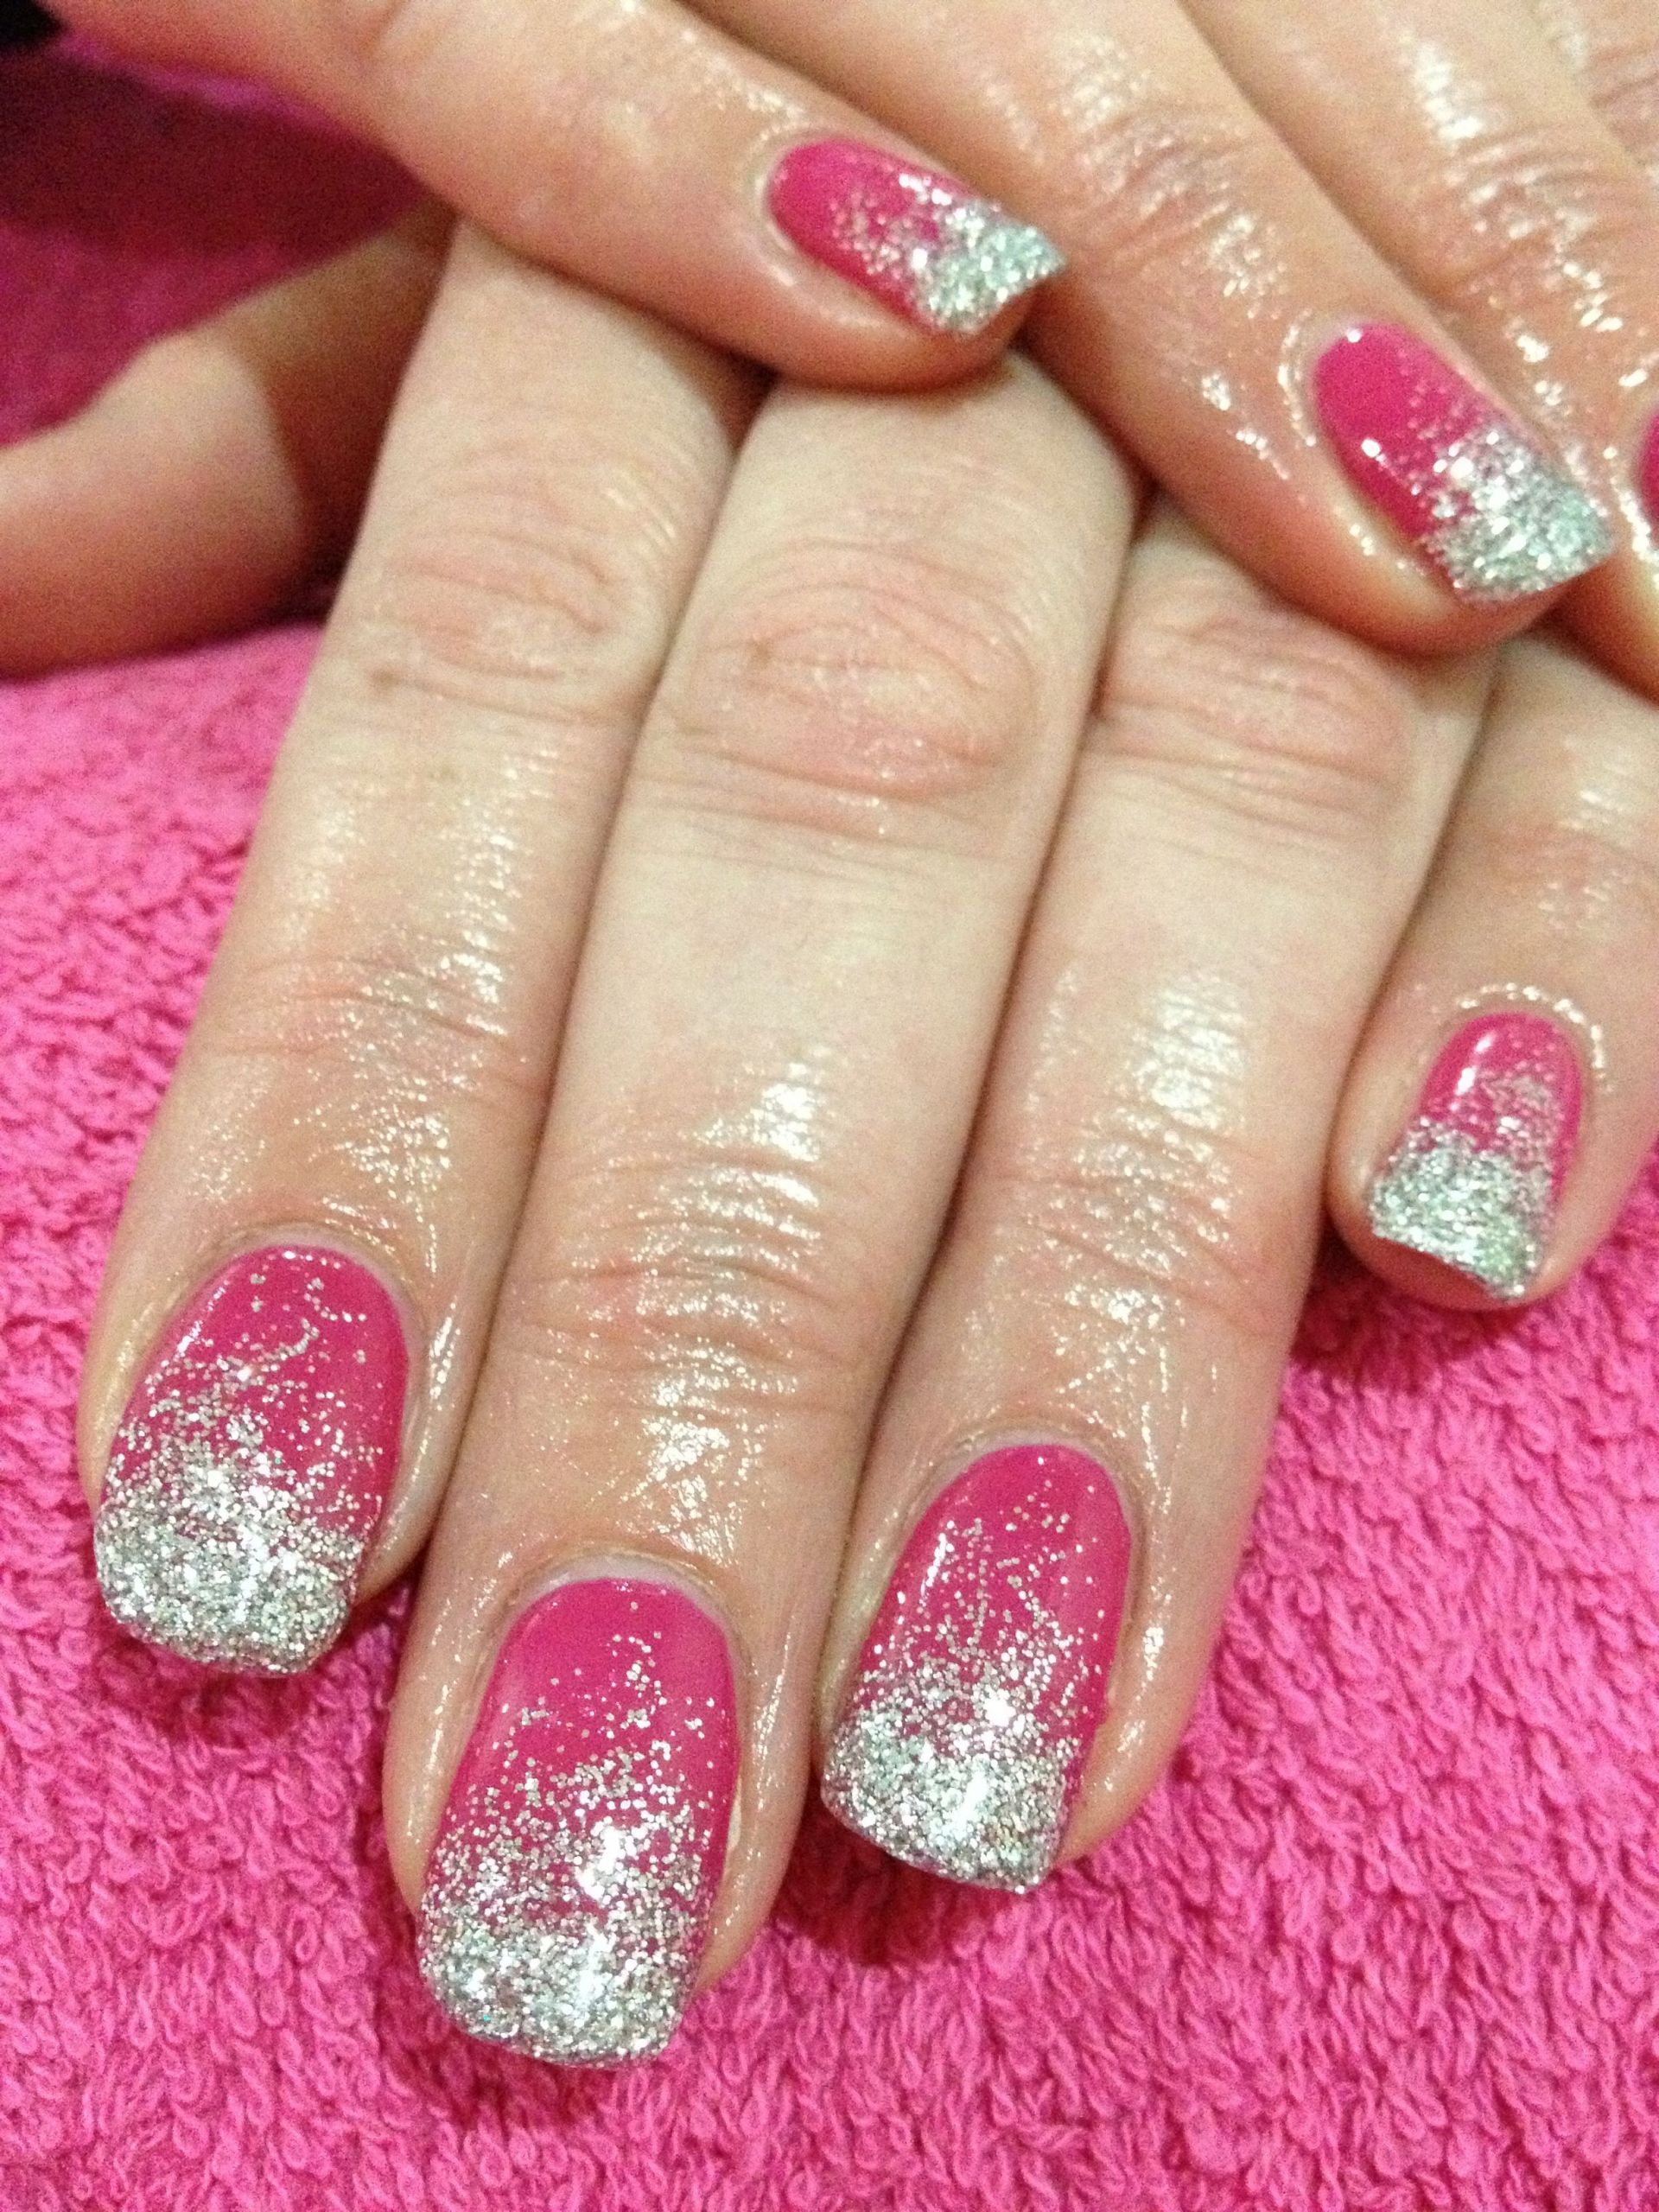 Glitter Ombre Gel Nails
 Pink and silver ombre glitter gel nails